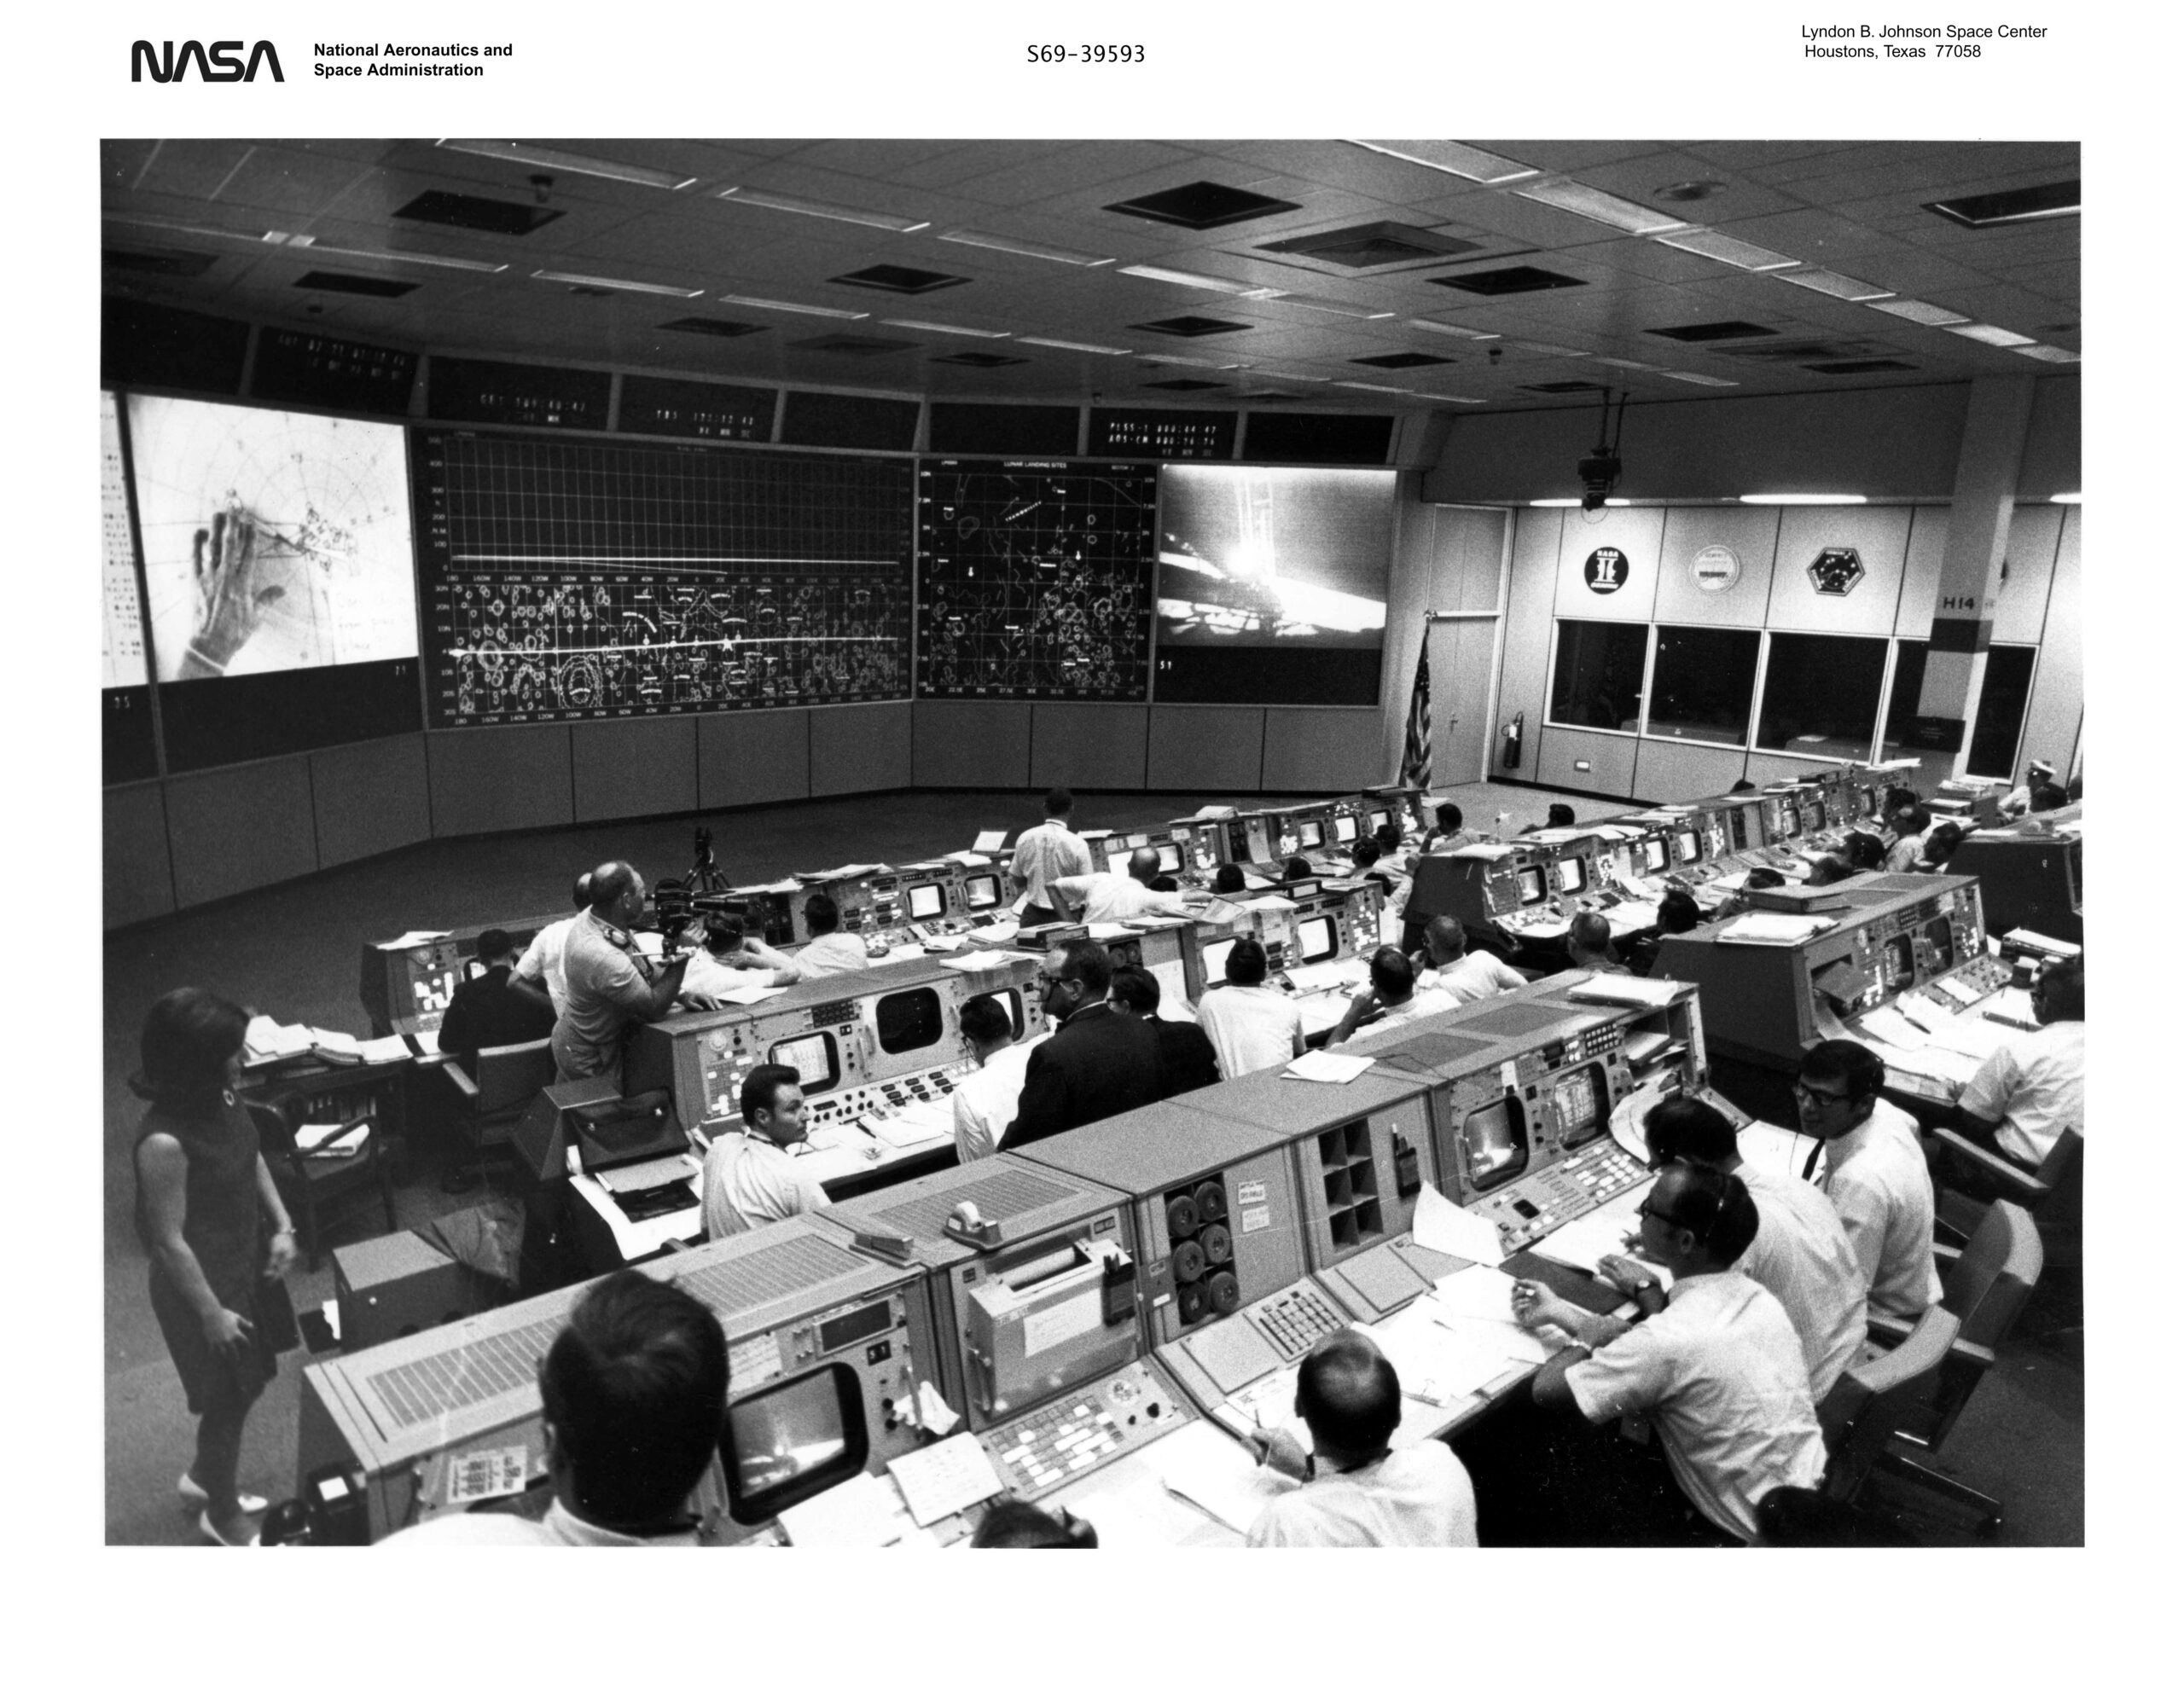 Black and White photo from NASA of the control room, used by Mission Control as the main identity image